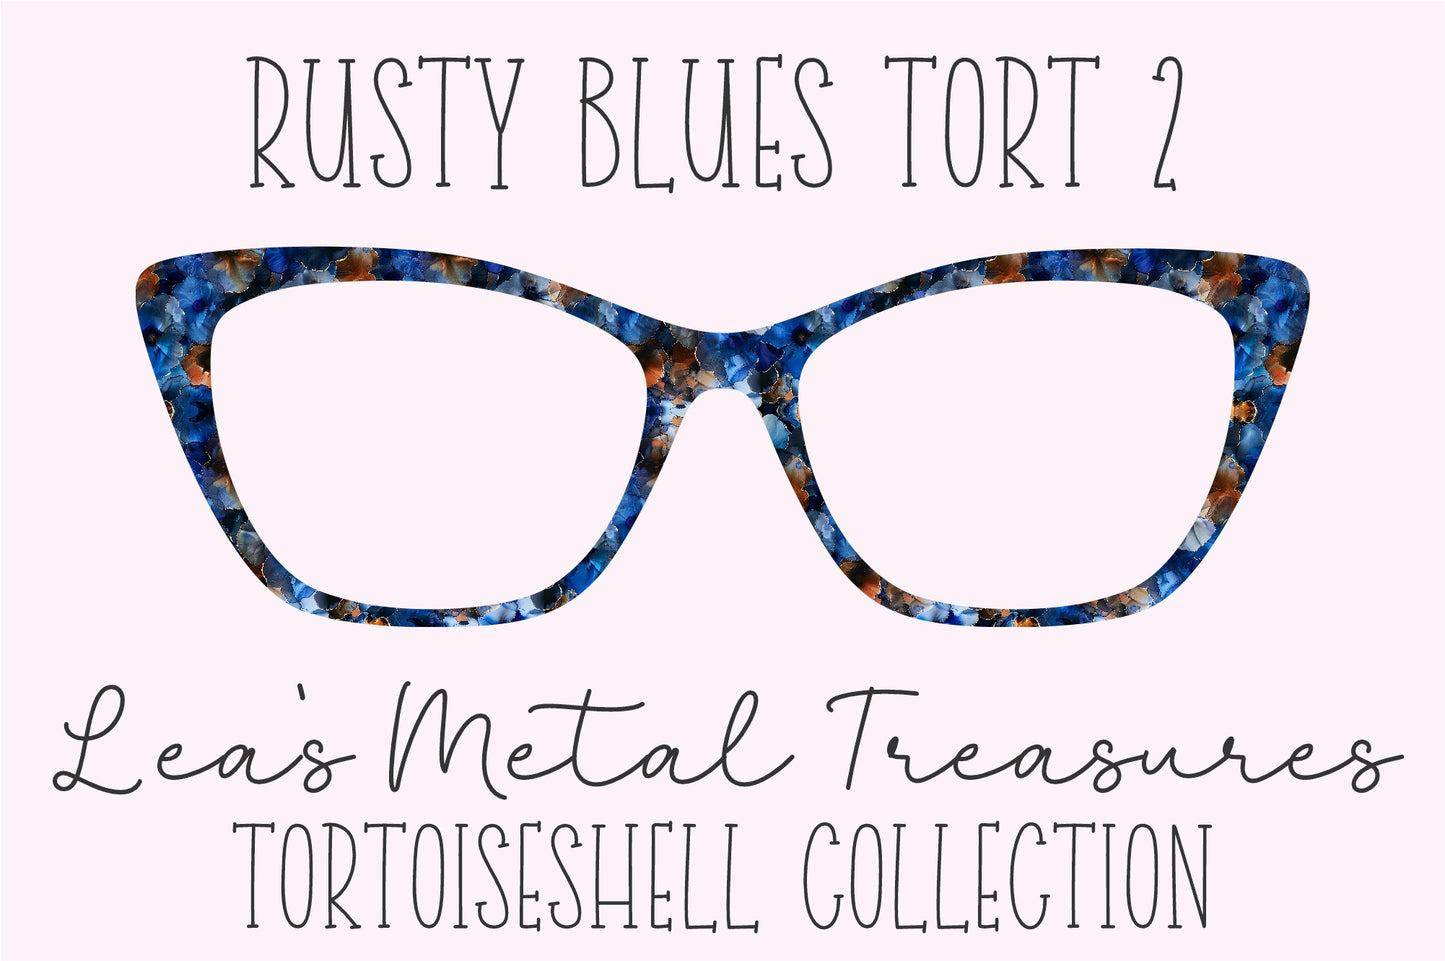 Rusty Blues Tort 2 Eyewear Frame Toppers COMES WITH MAGNETS